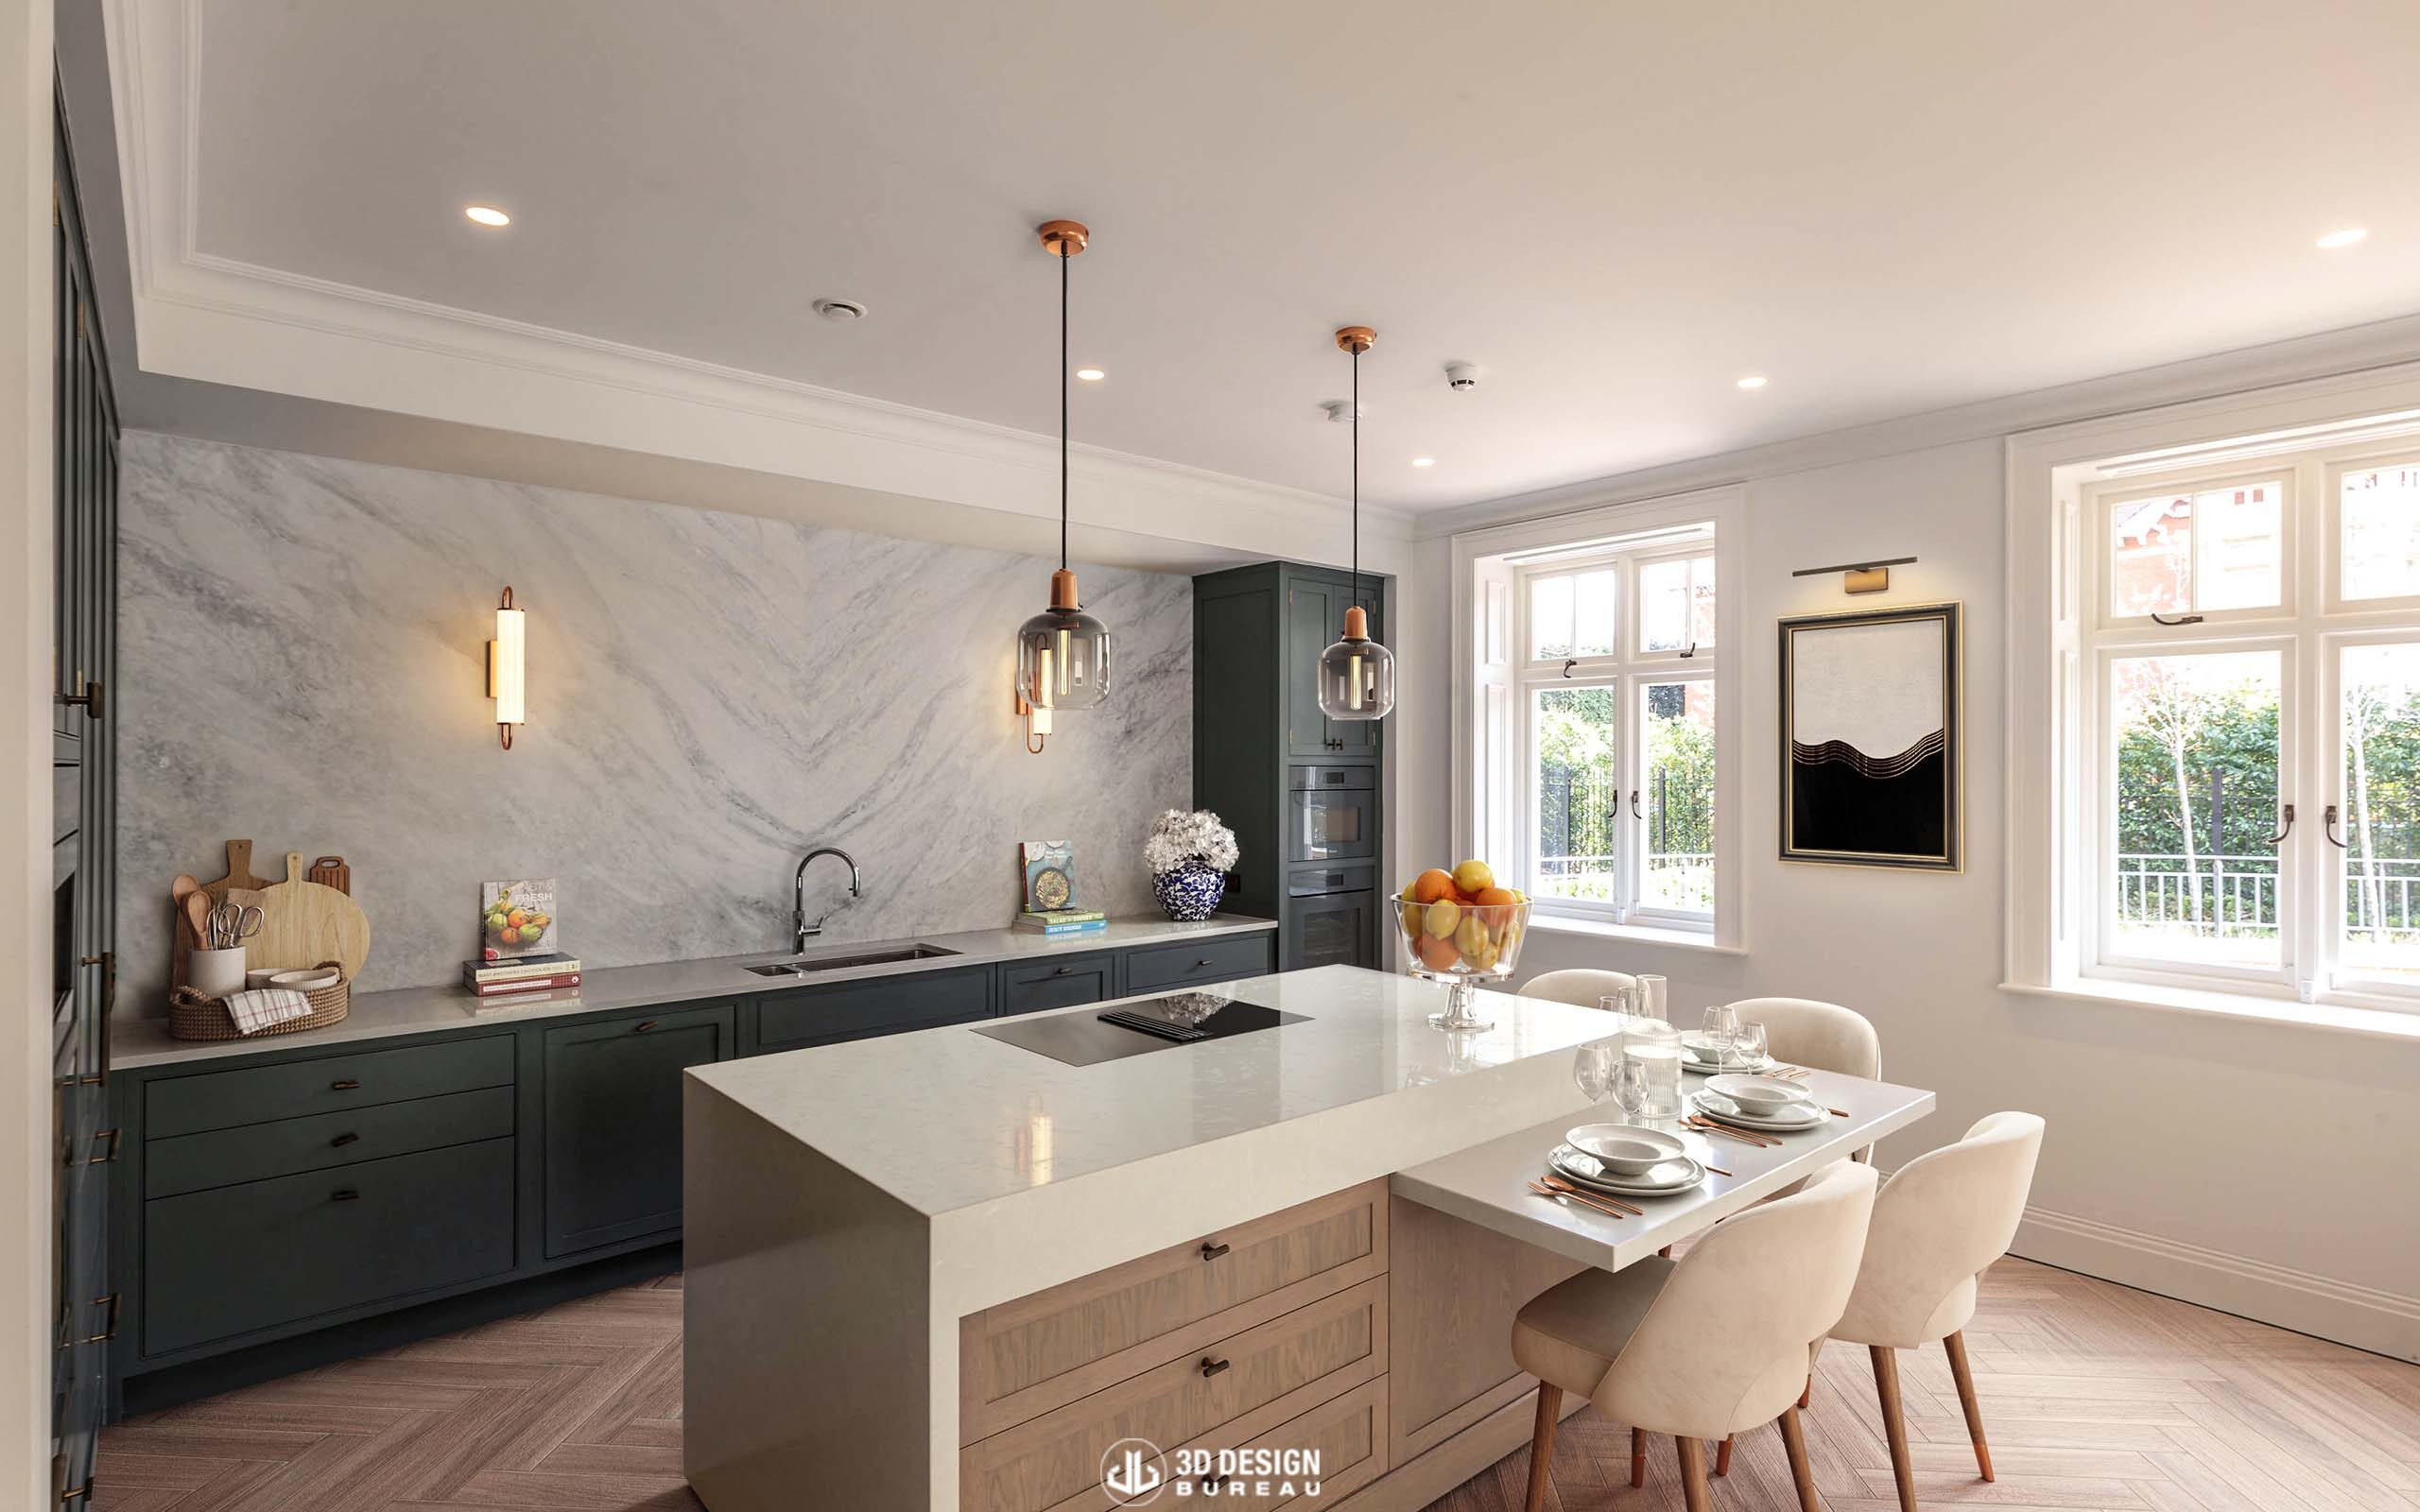 Virtual Staging of a kitchen within a luxury housing development.